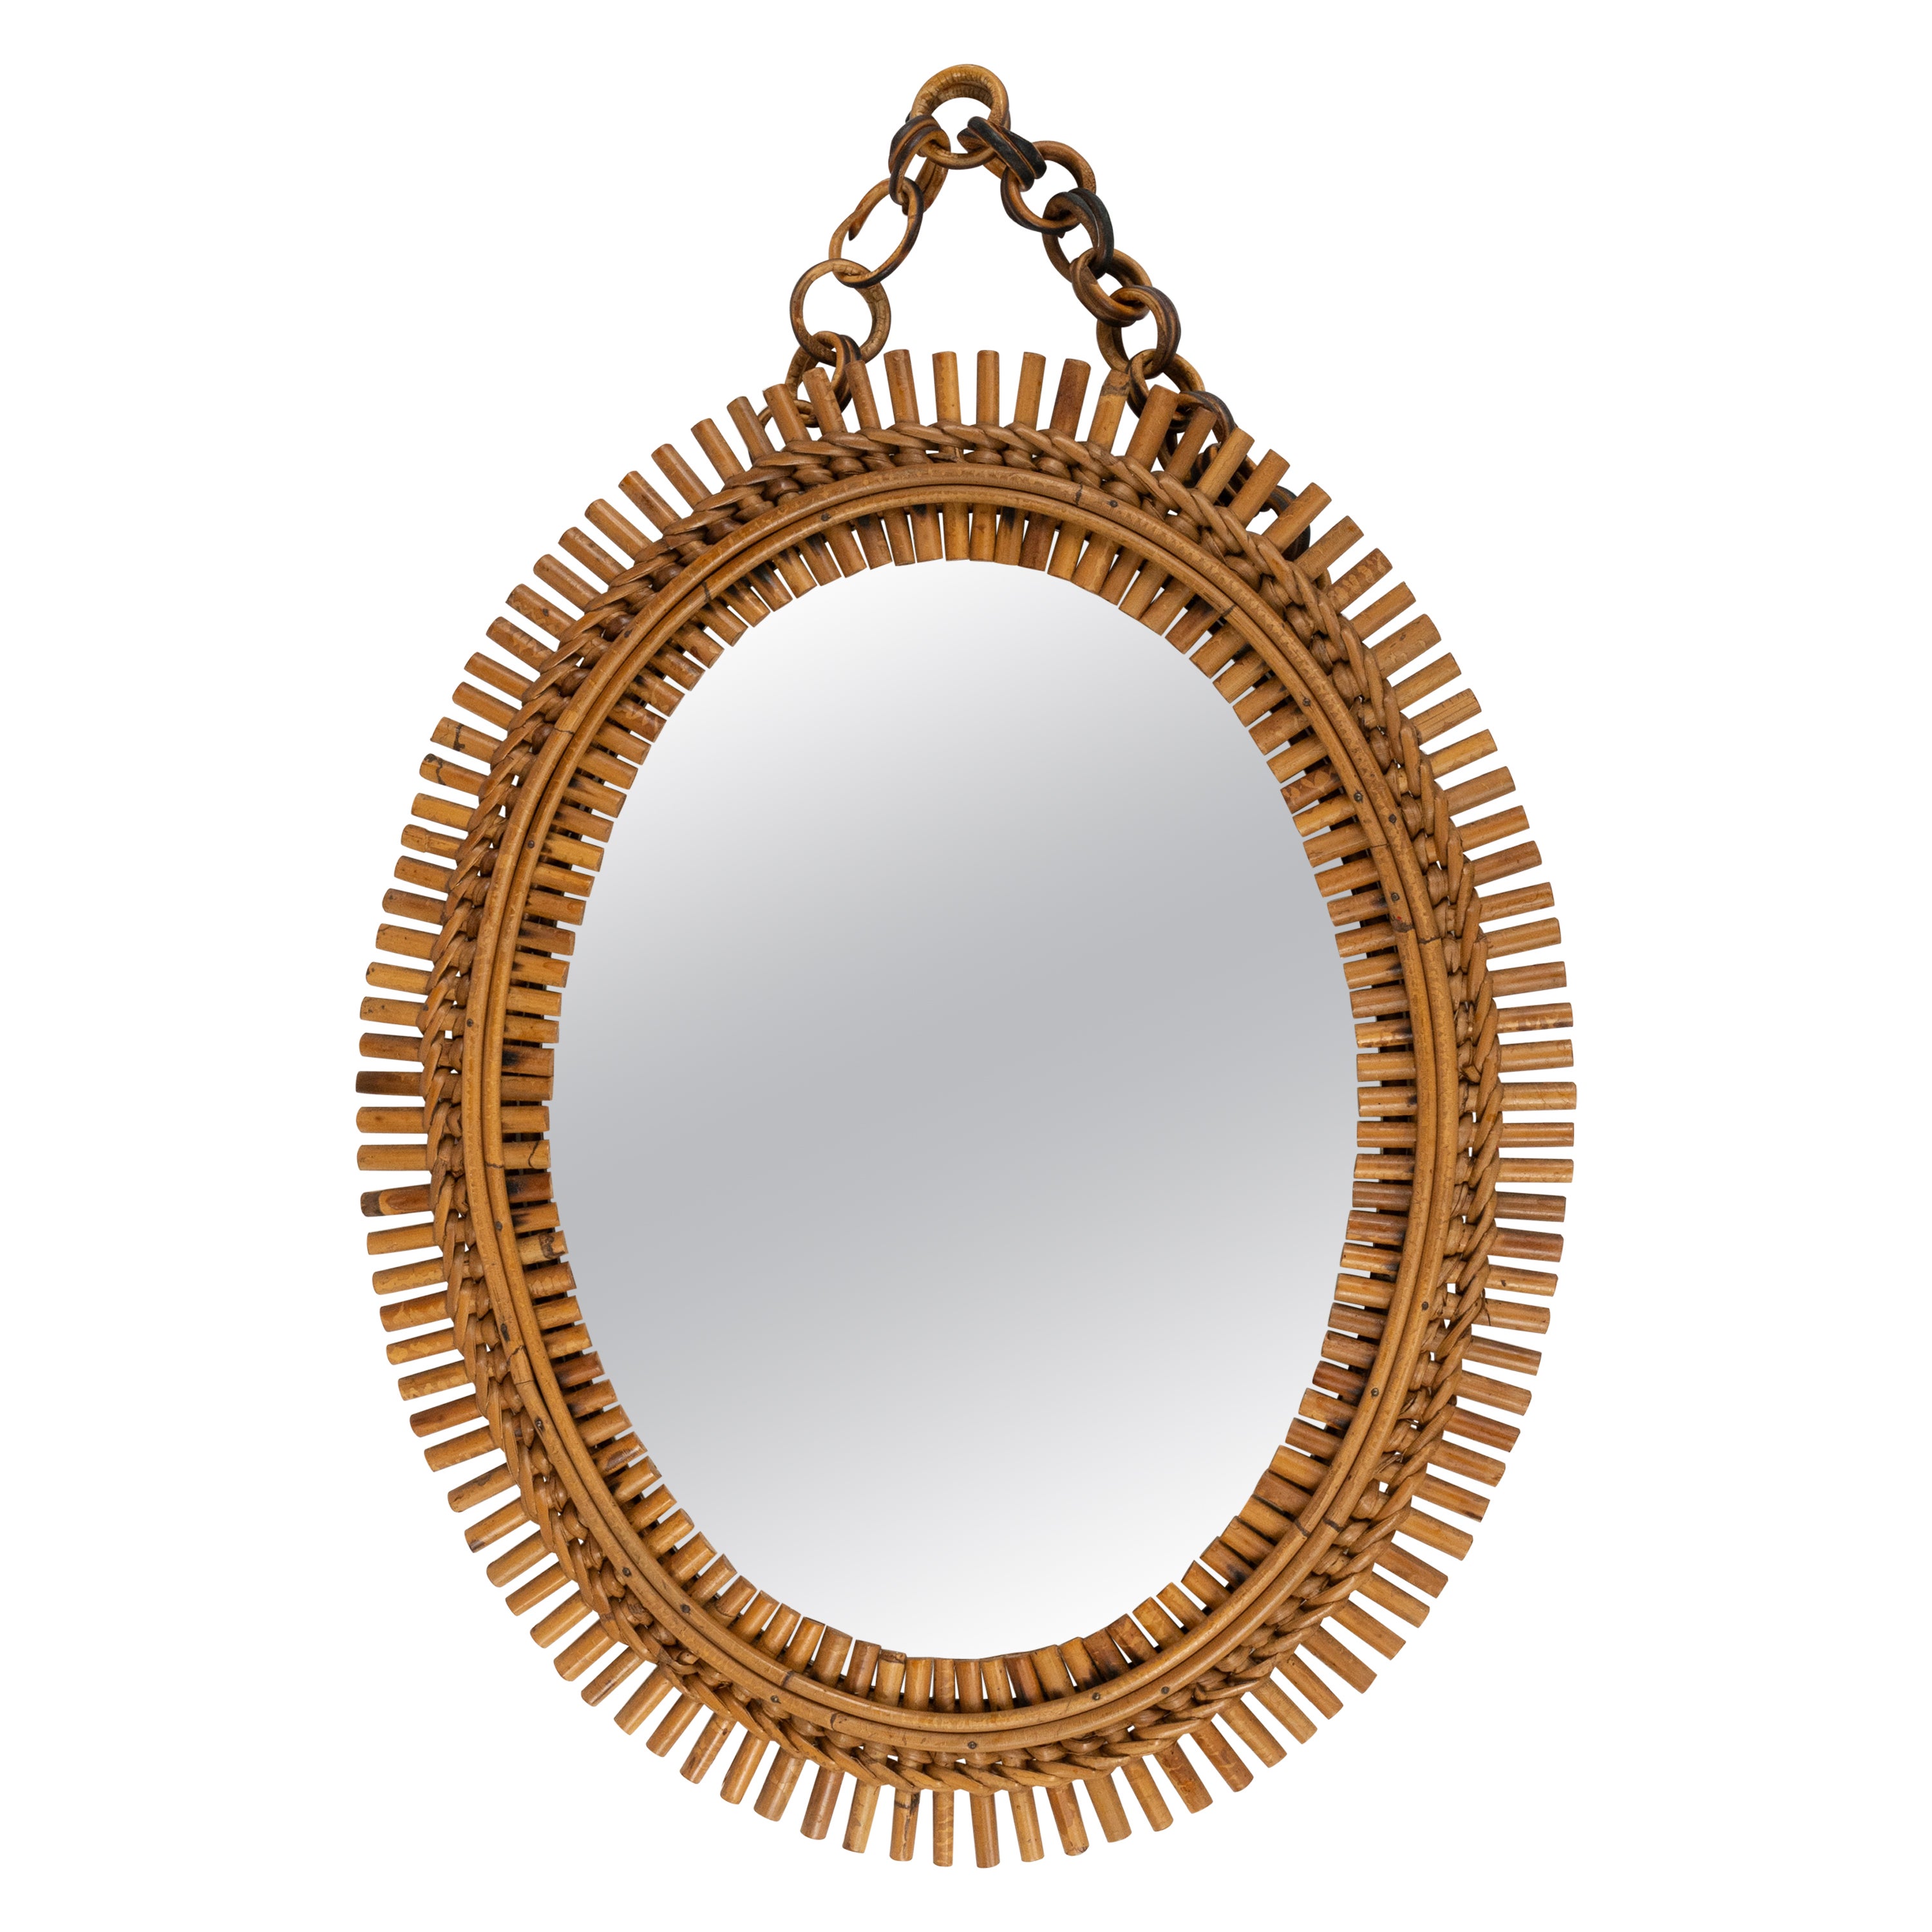 Midcentury Rattan and Bamboo Oval Wall Mirror with Chain, Italy 1960s For Sale